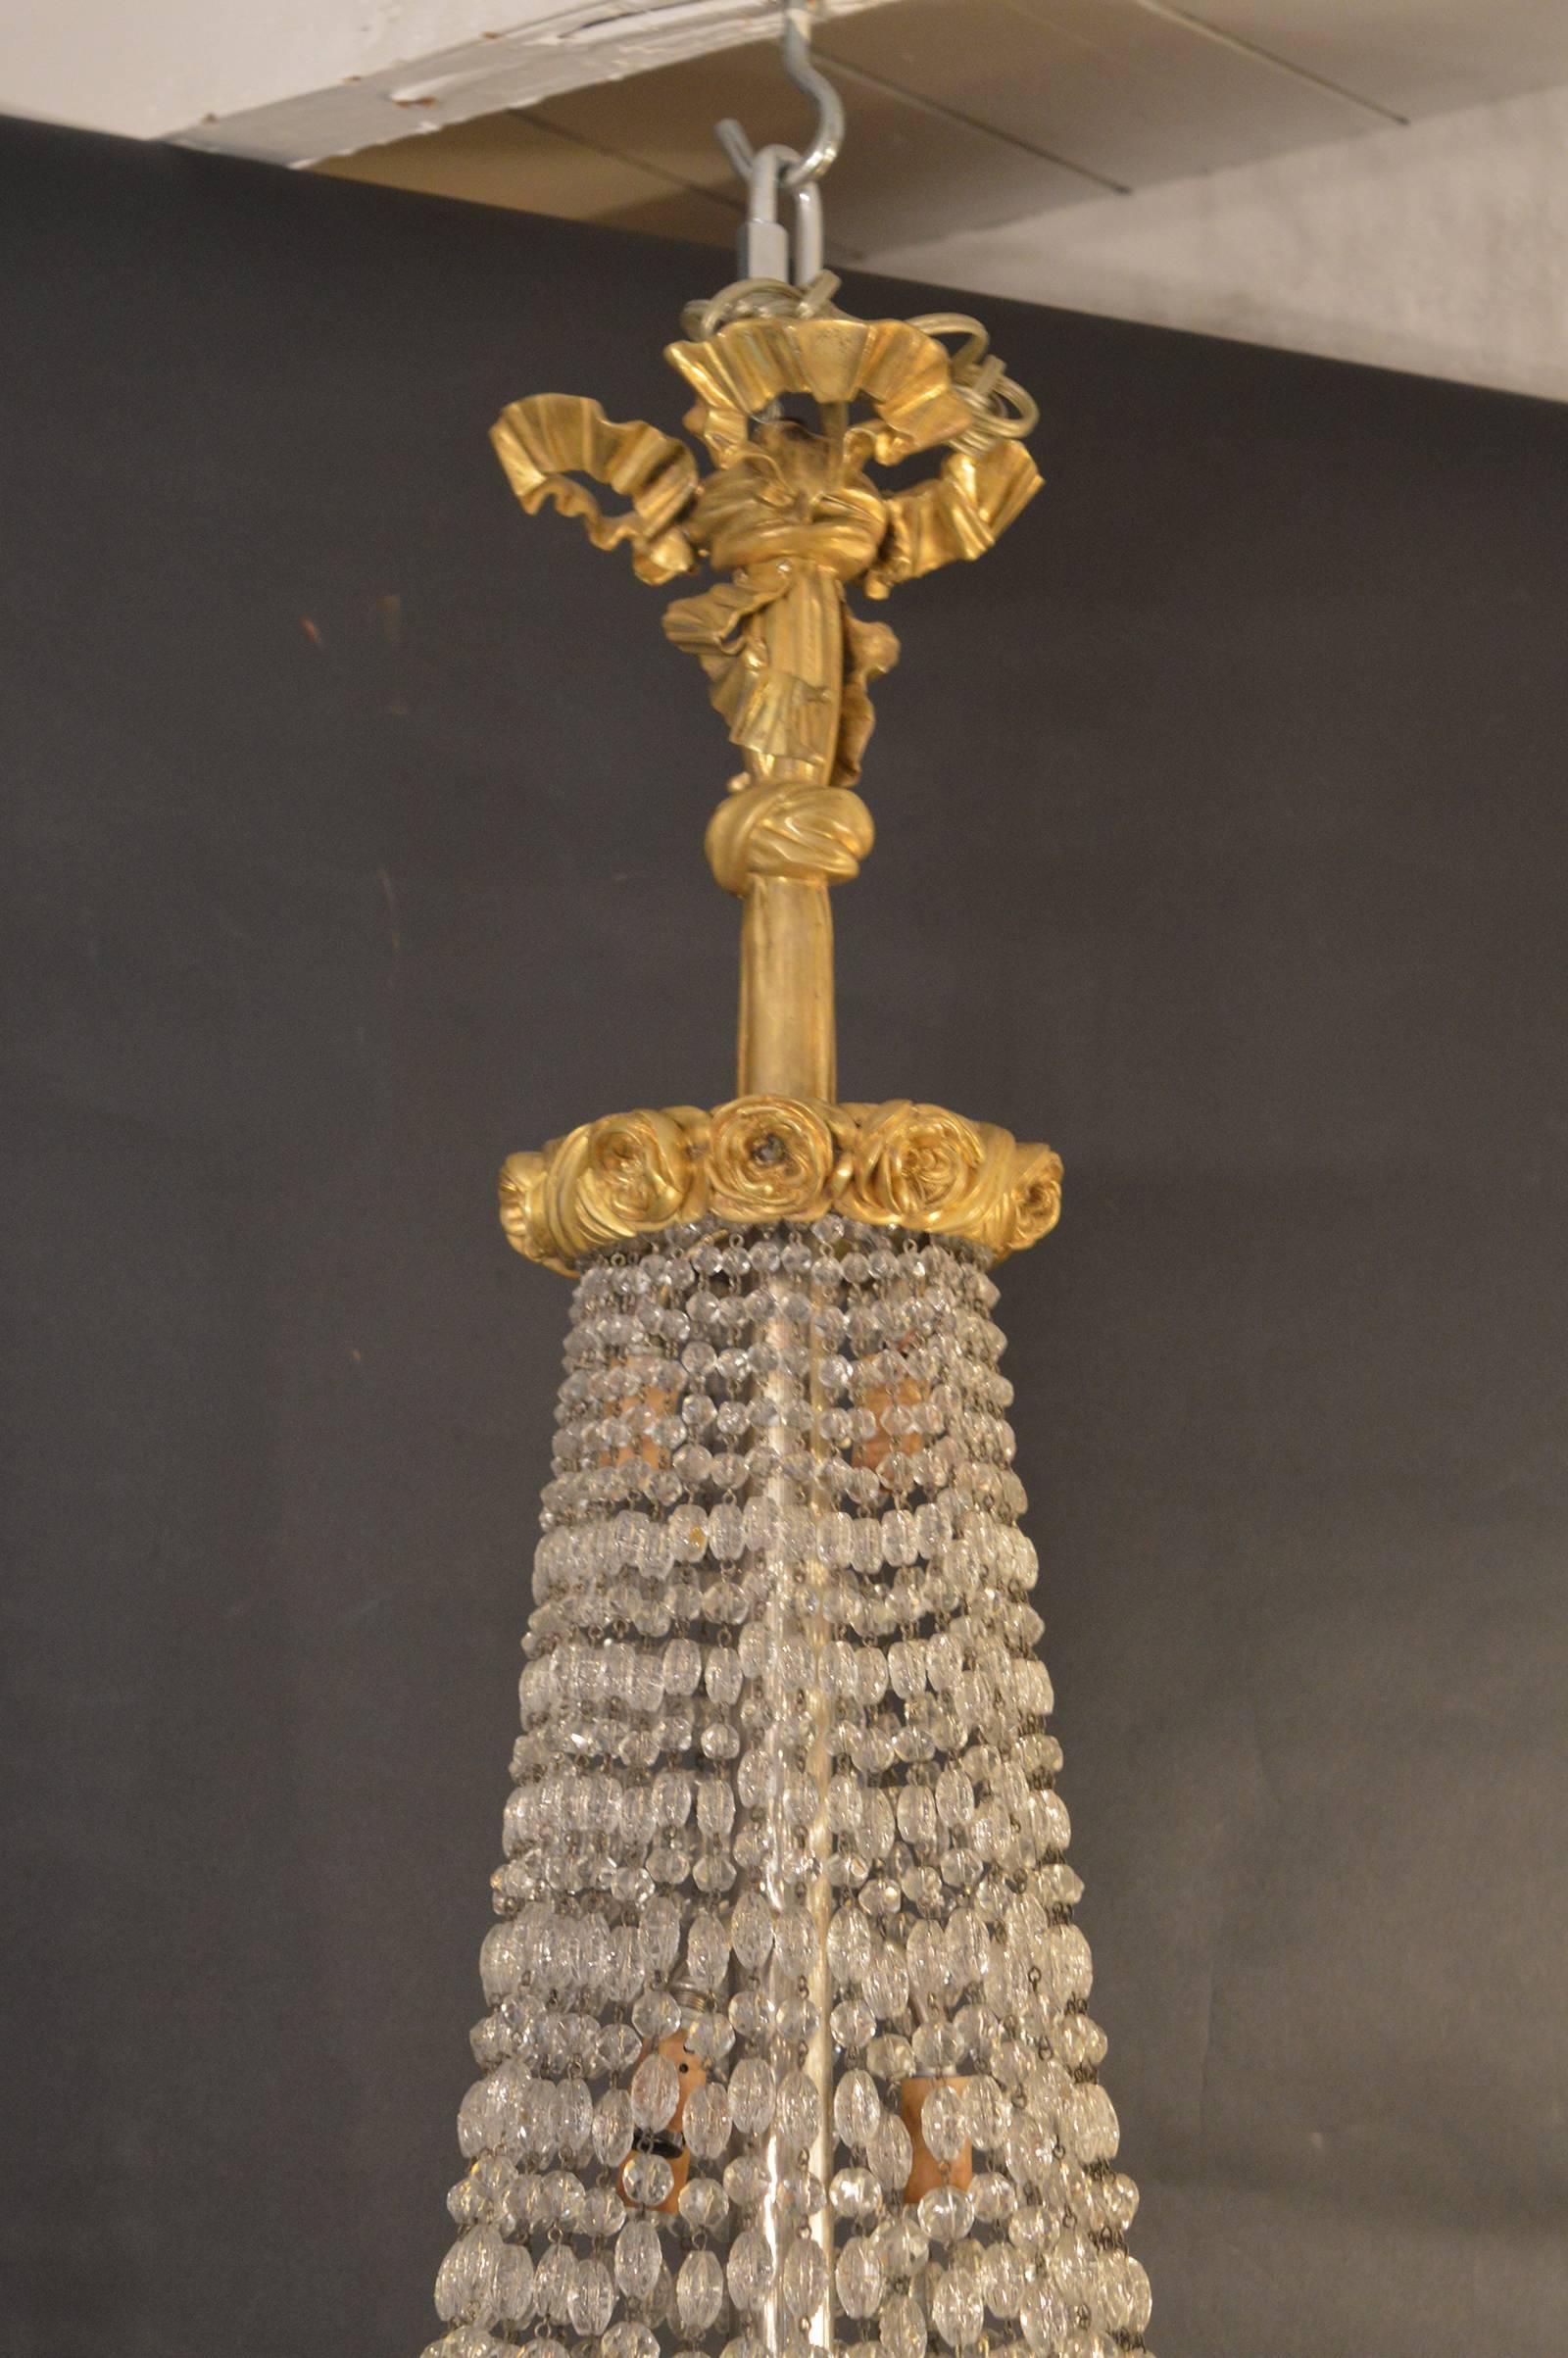 19th century French chandelier, ormolu gold plated bronze with crystals.